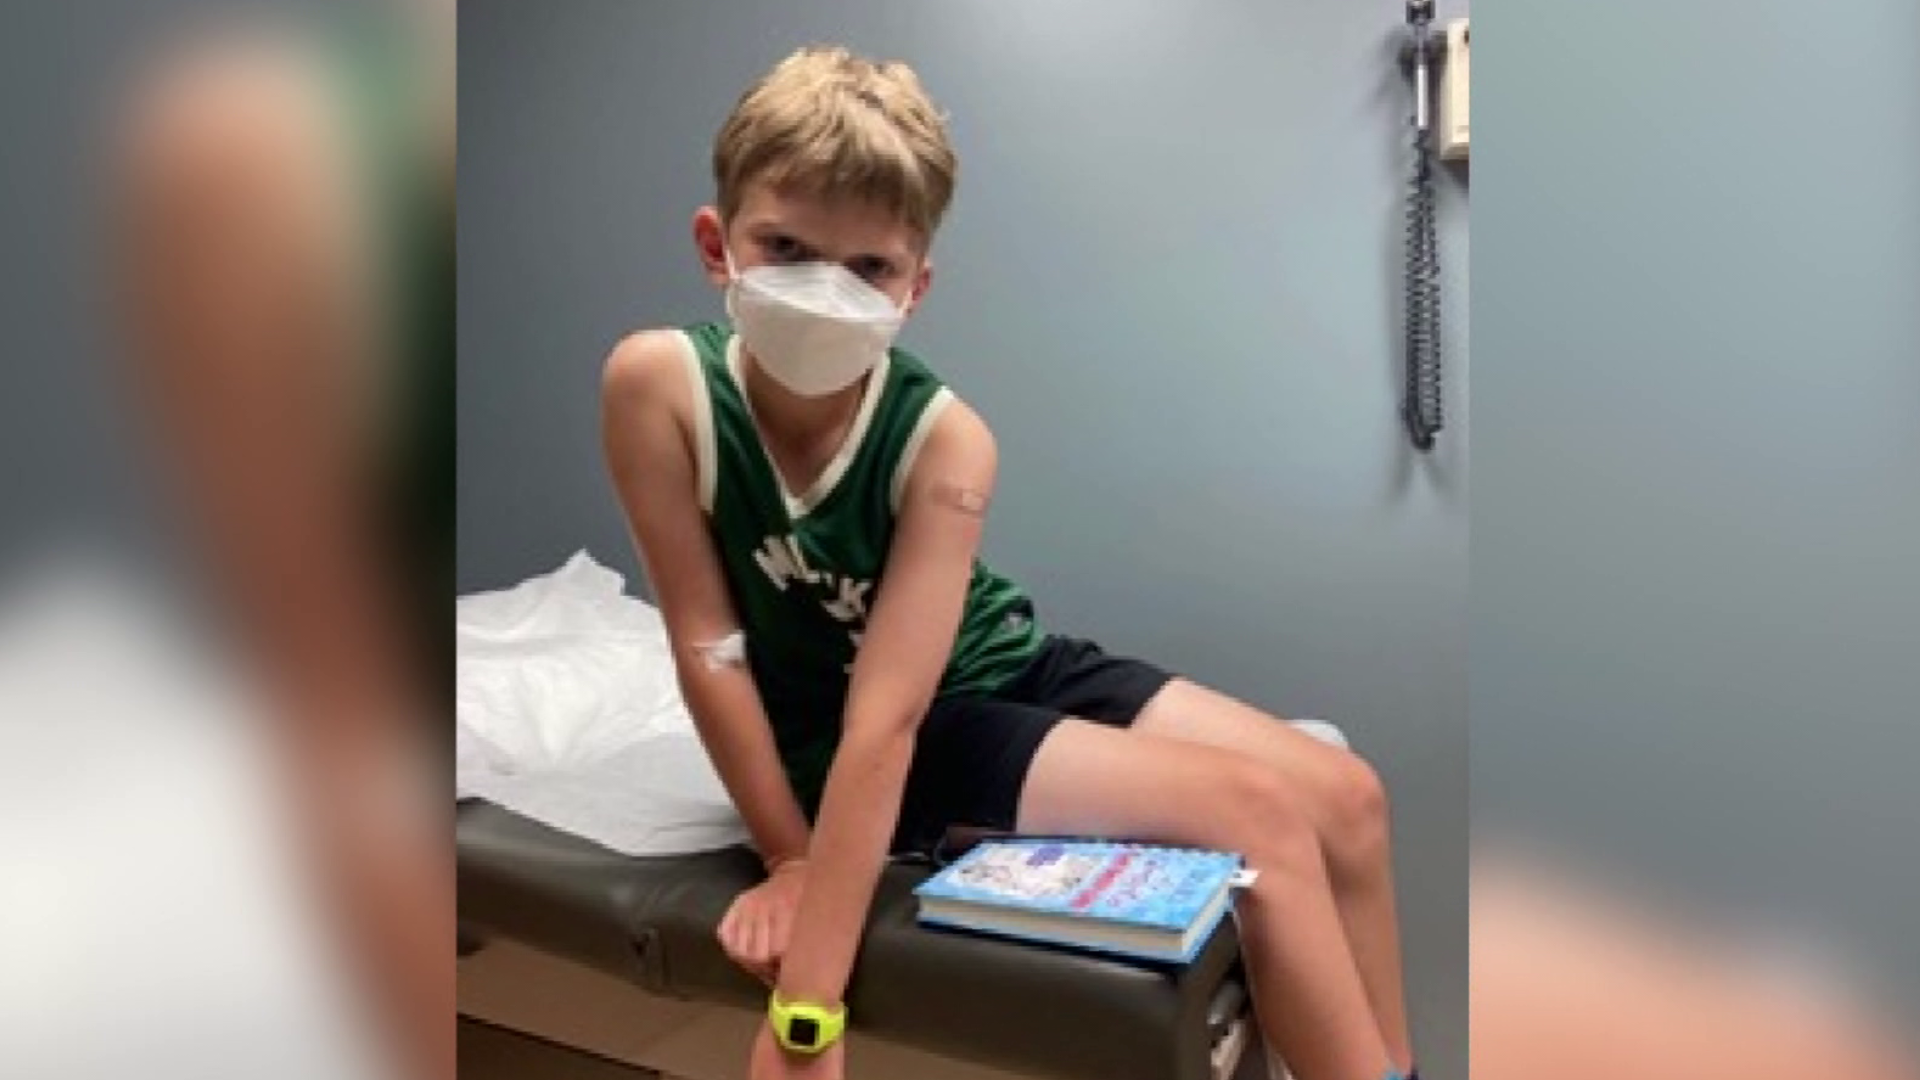 Nolan Roberts' mother says she had mixed feelings about the vaccine trial when Nolan first suggested joining it, but she agreed once she did her research.